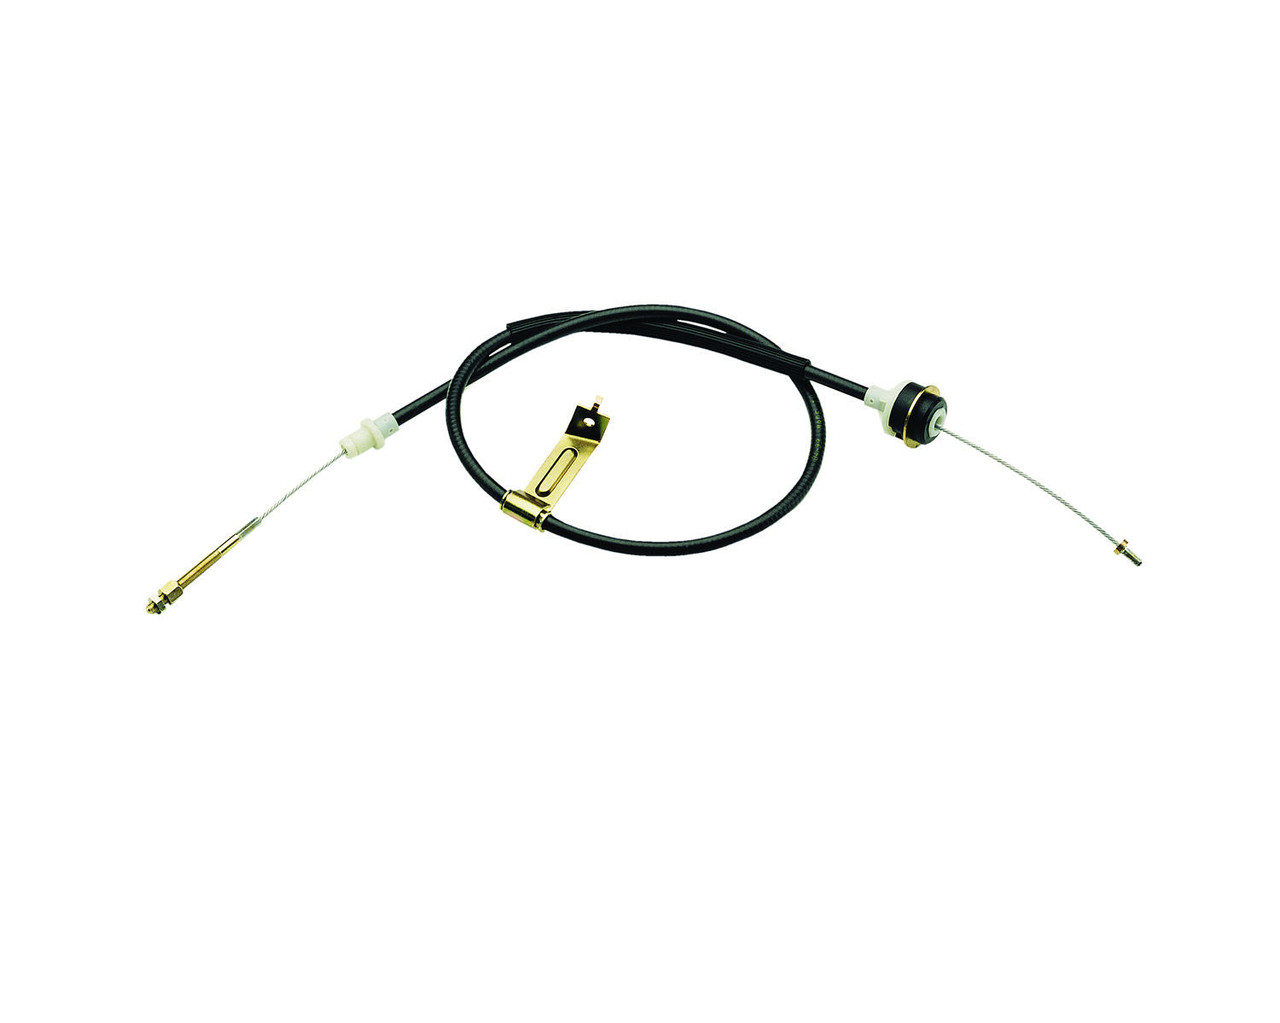 Replacement Clutch Cable For M7553-B302